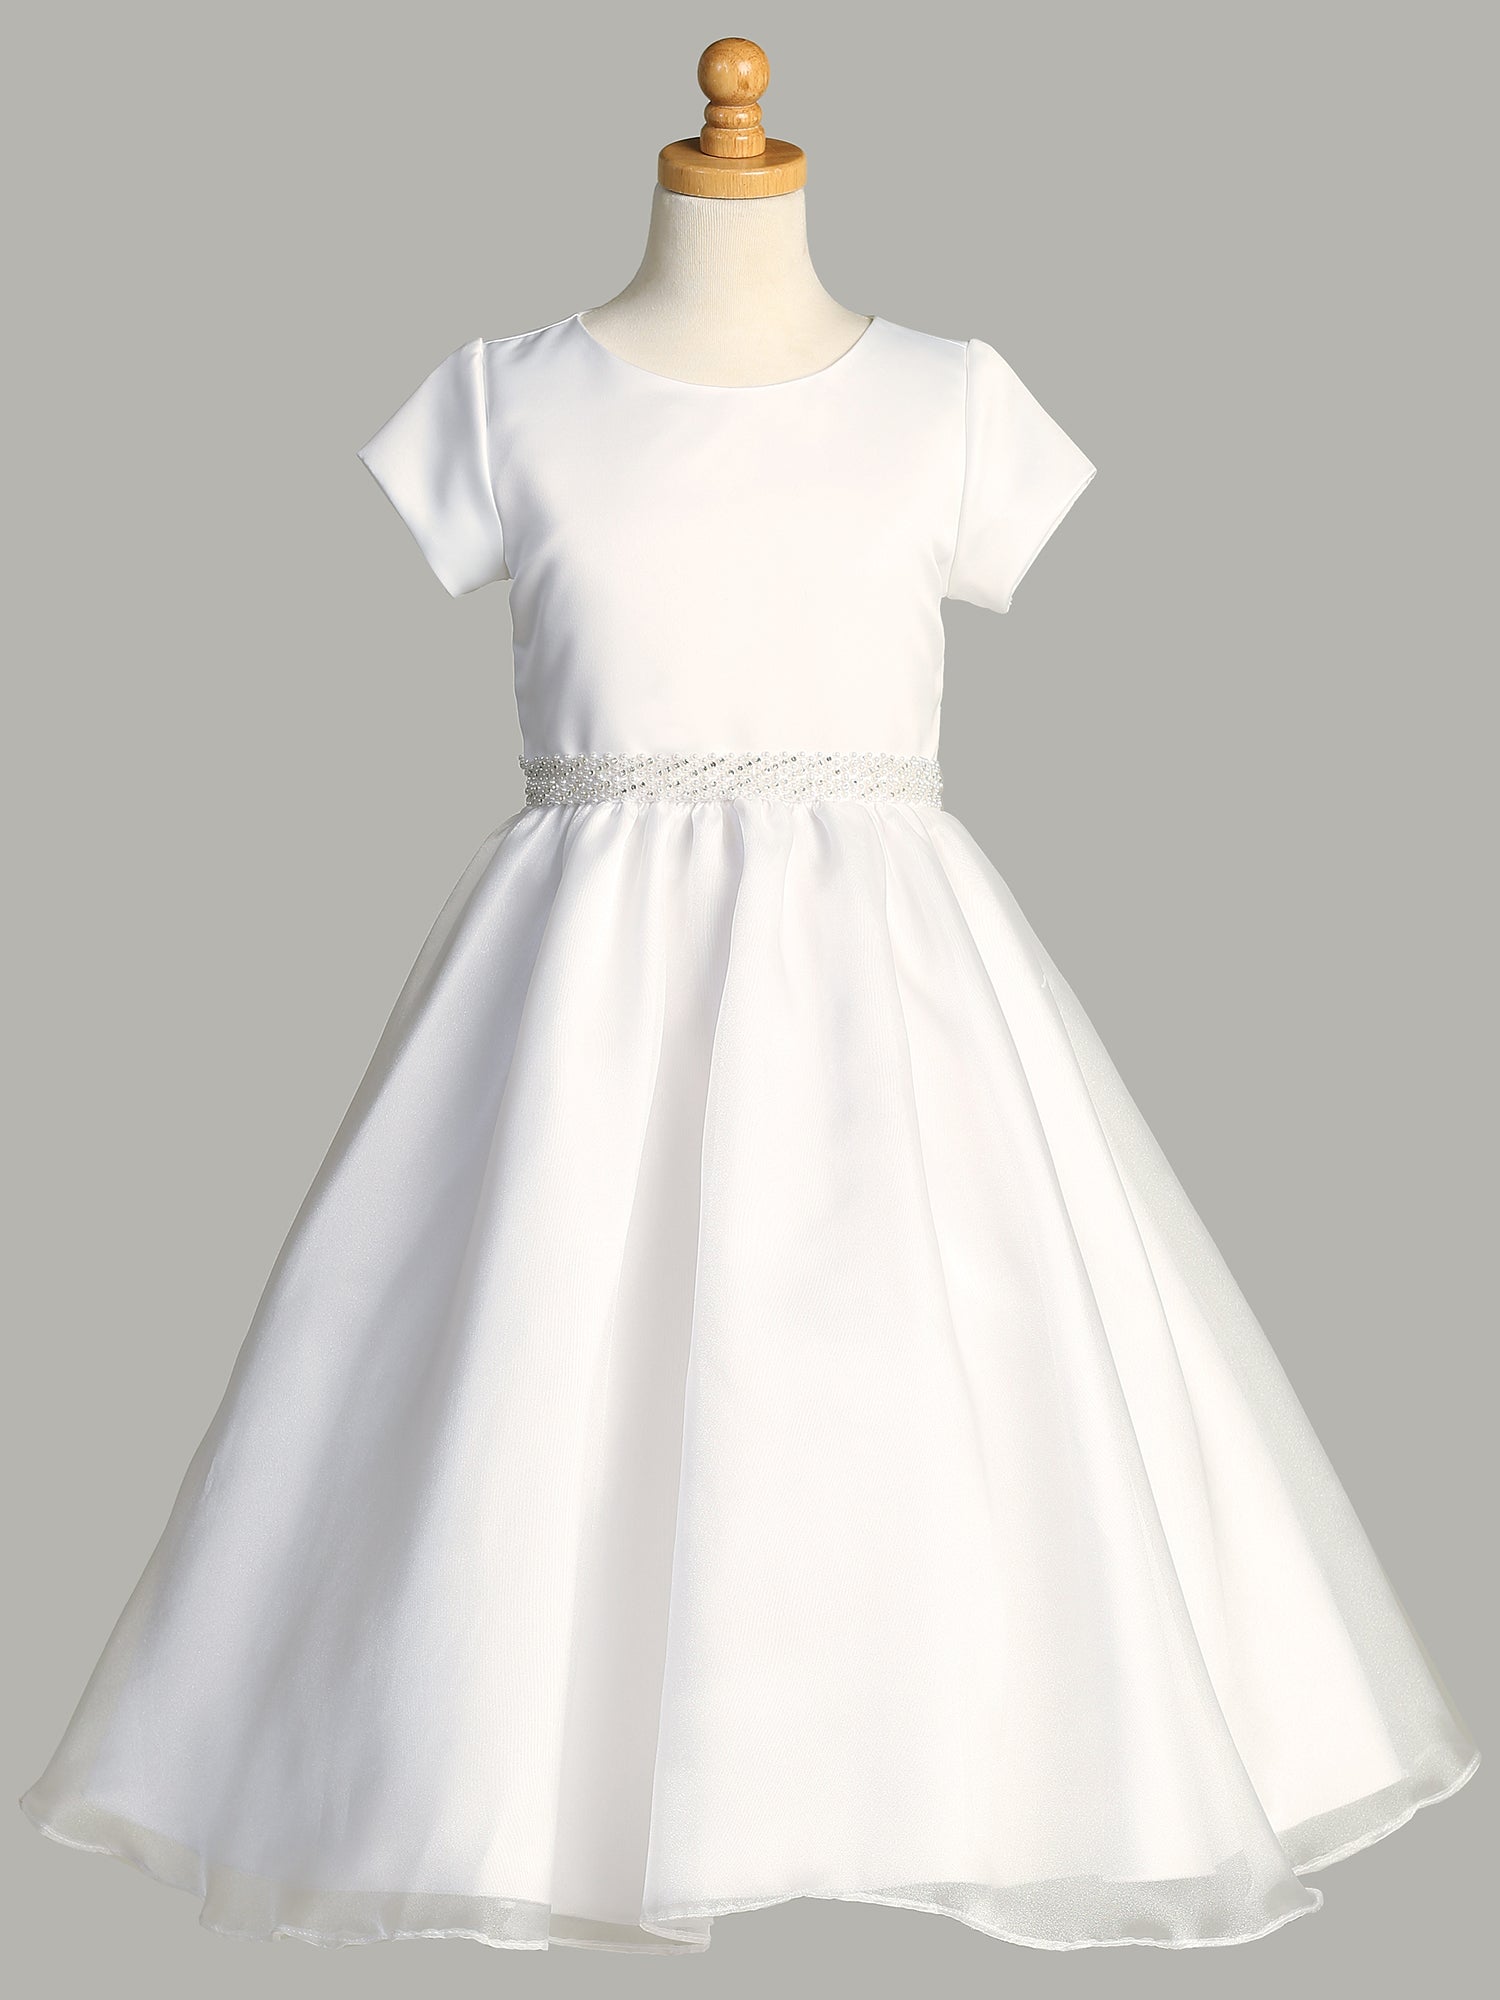 A side view of the First Communion Dress showing the cap sleeves and the tea-length of the dress.